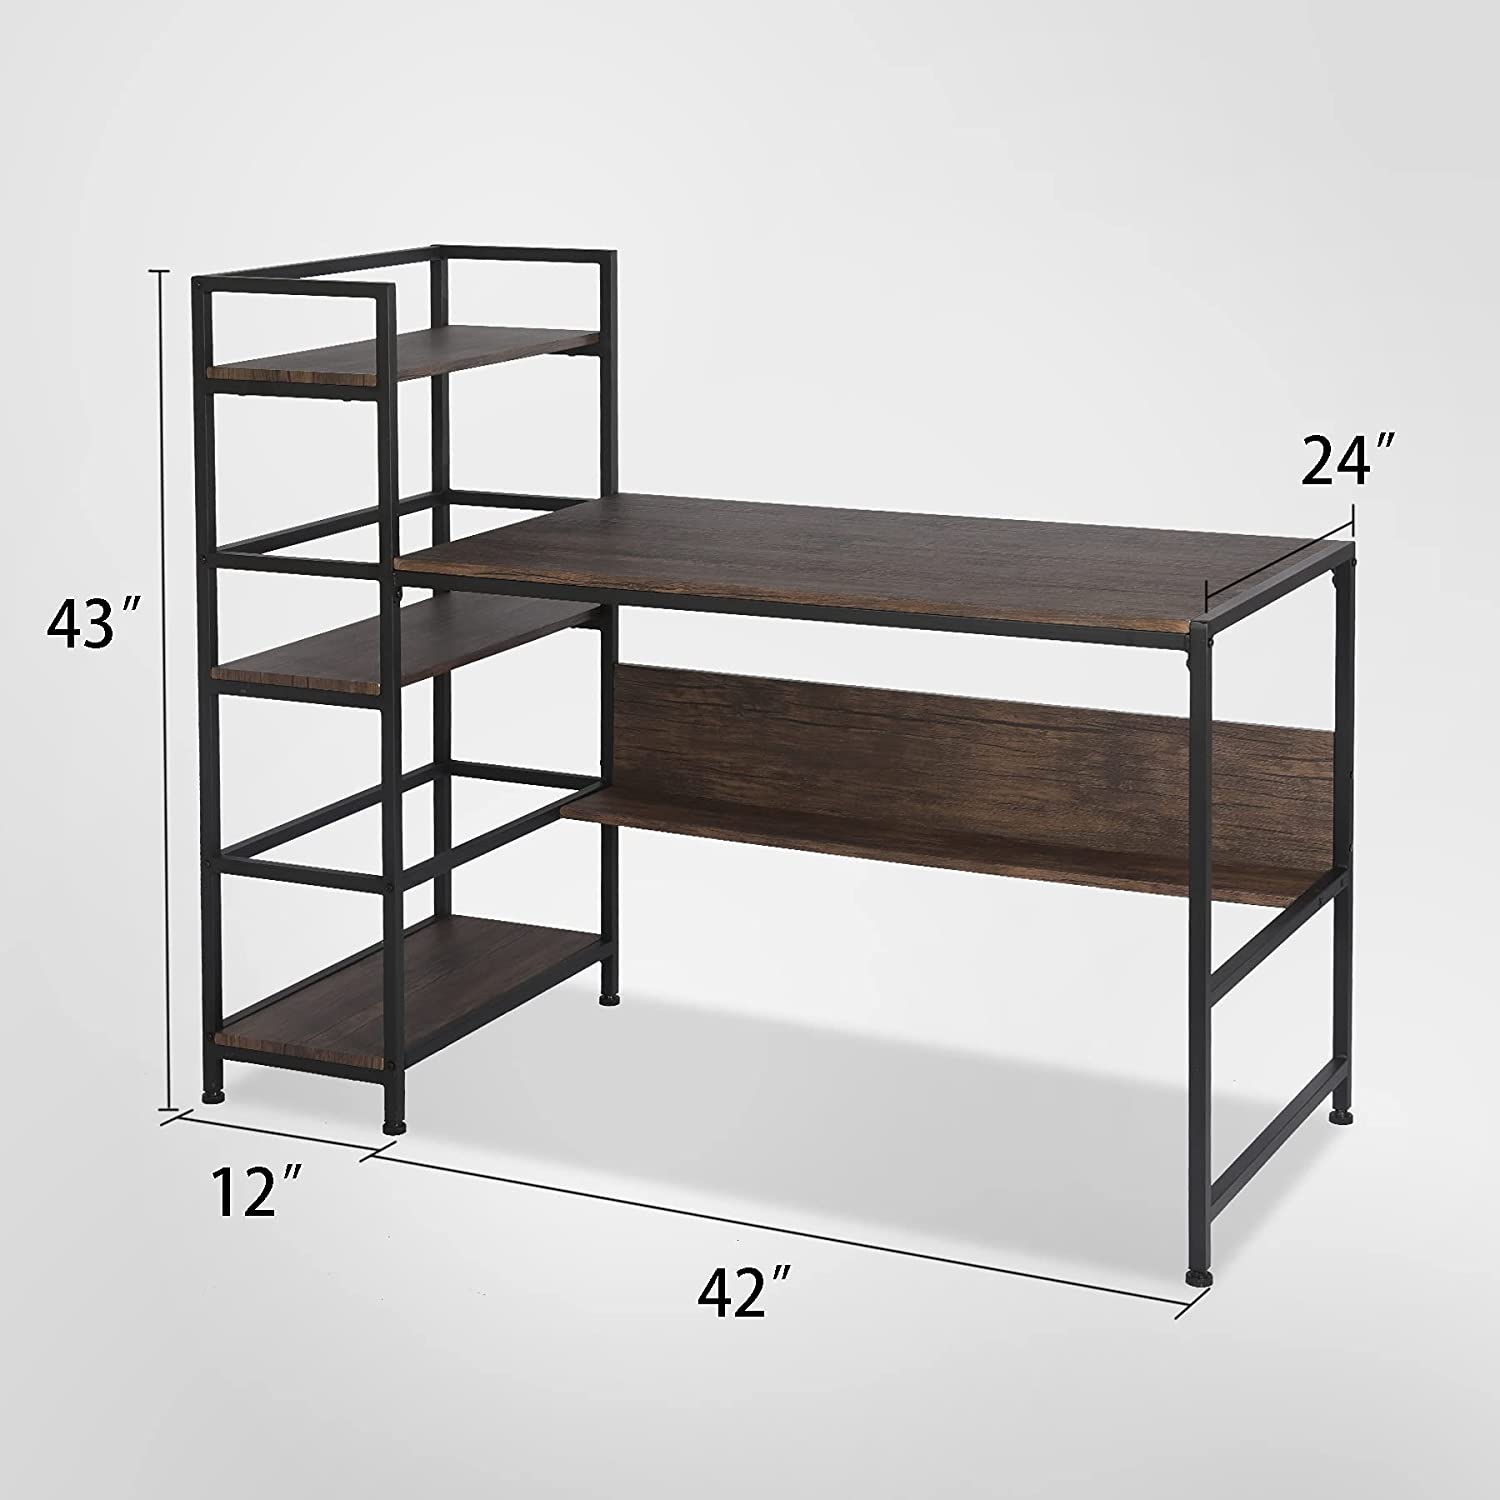 54 inch Modern Simple Style with 3 Storage Shelves for Home Office Wooden Bookshelf for Study Writing Table Computer Desk